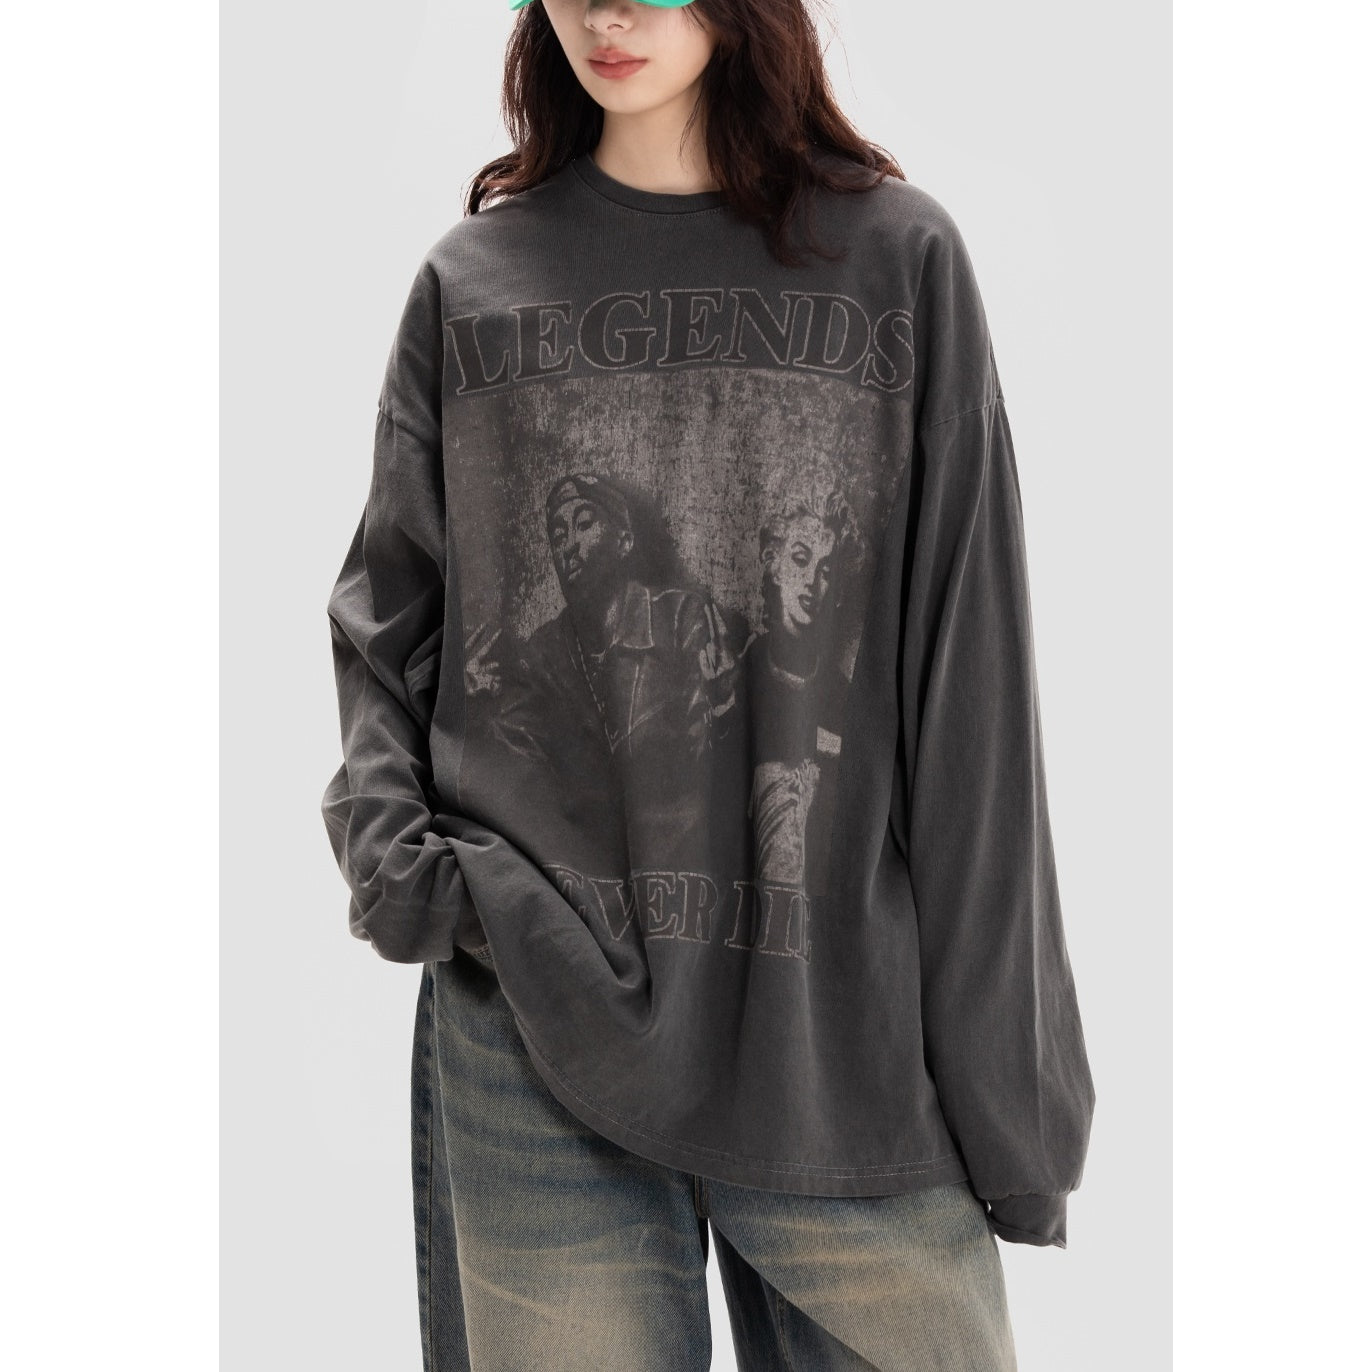 Washed Old Character Alphabet Print Long Sleeve T-Shirt MW9063